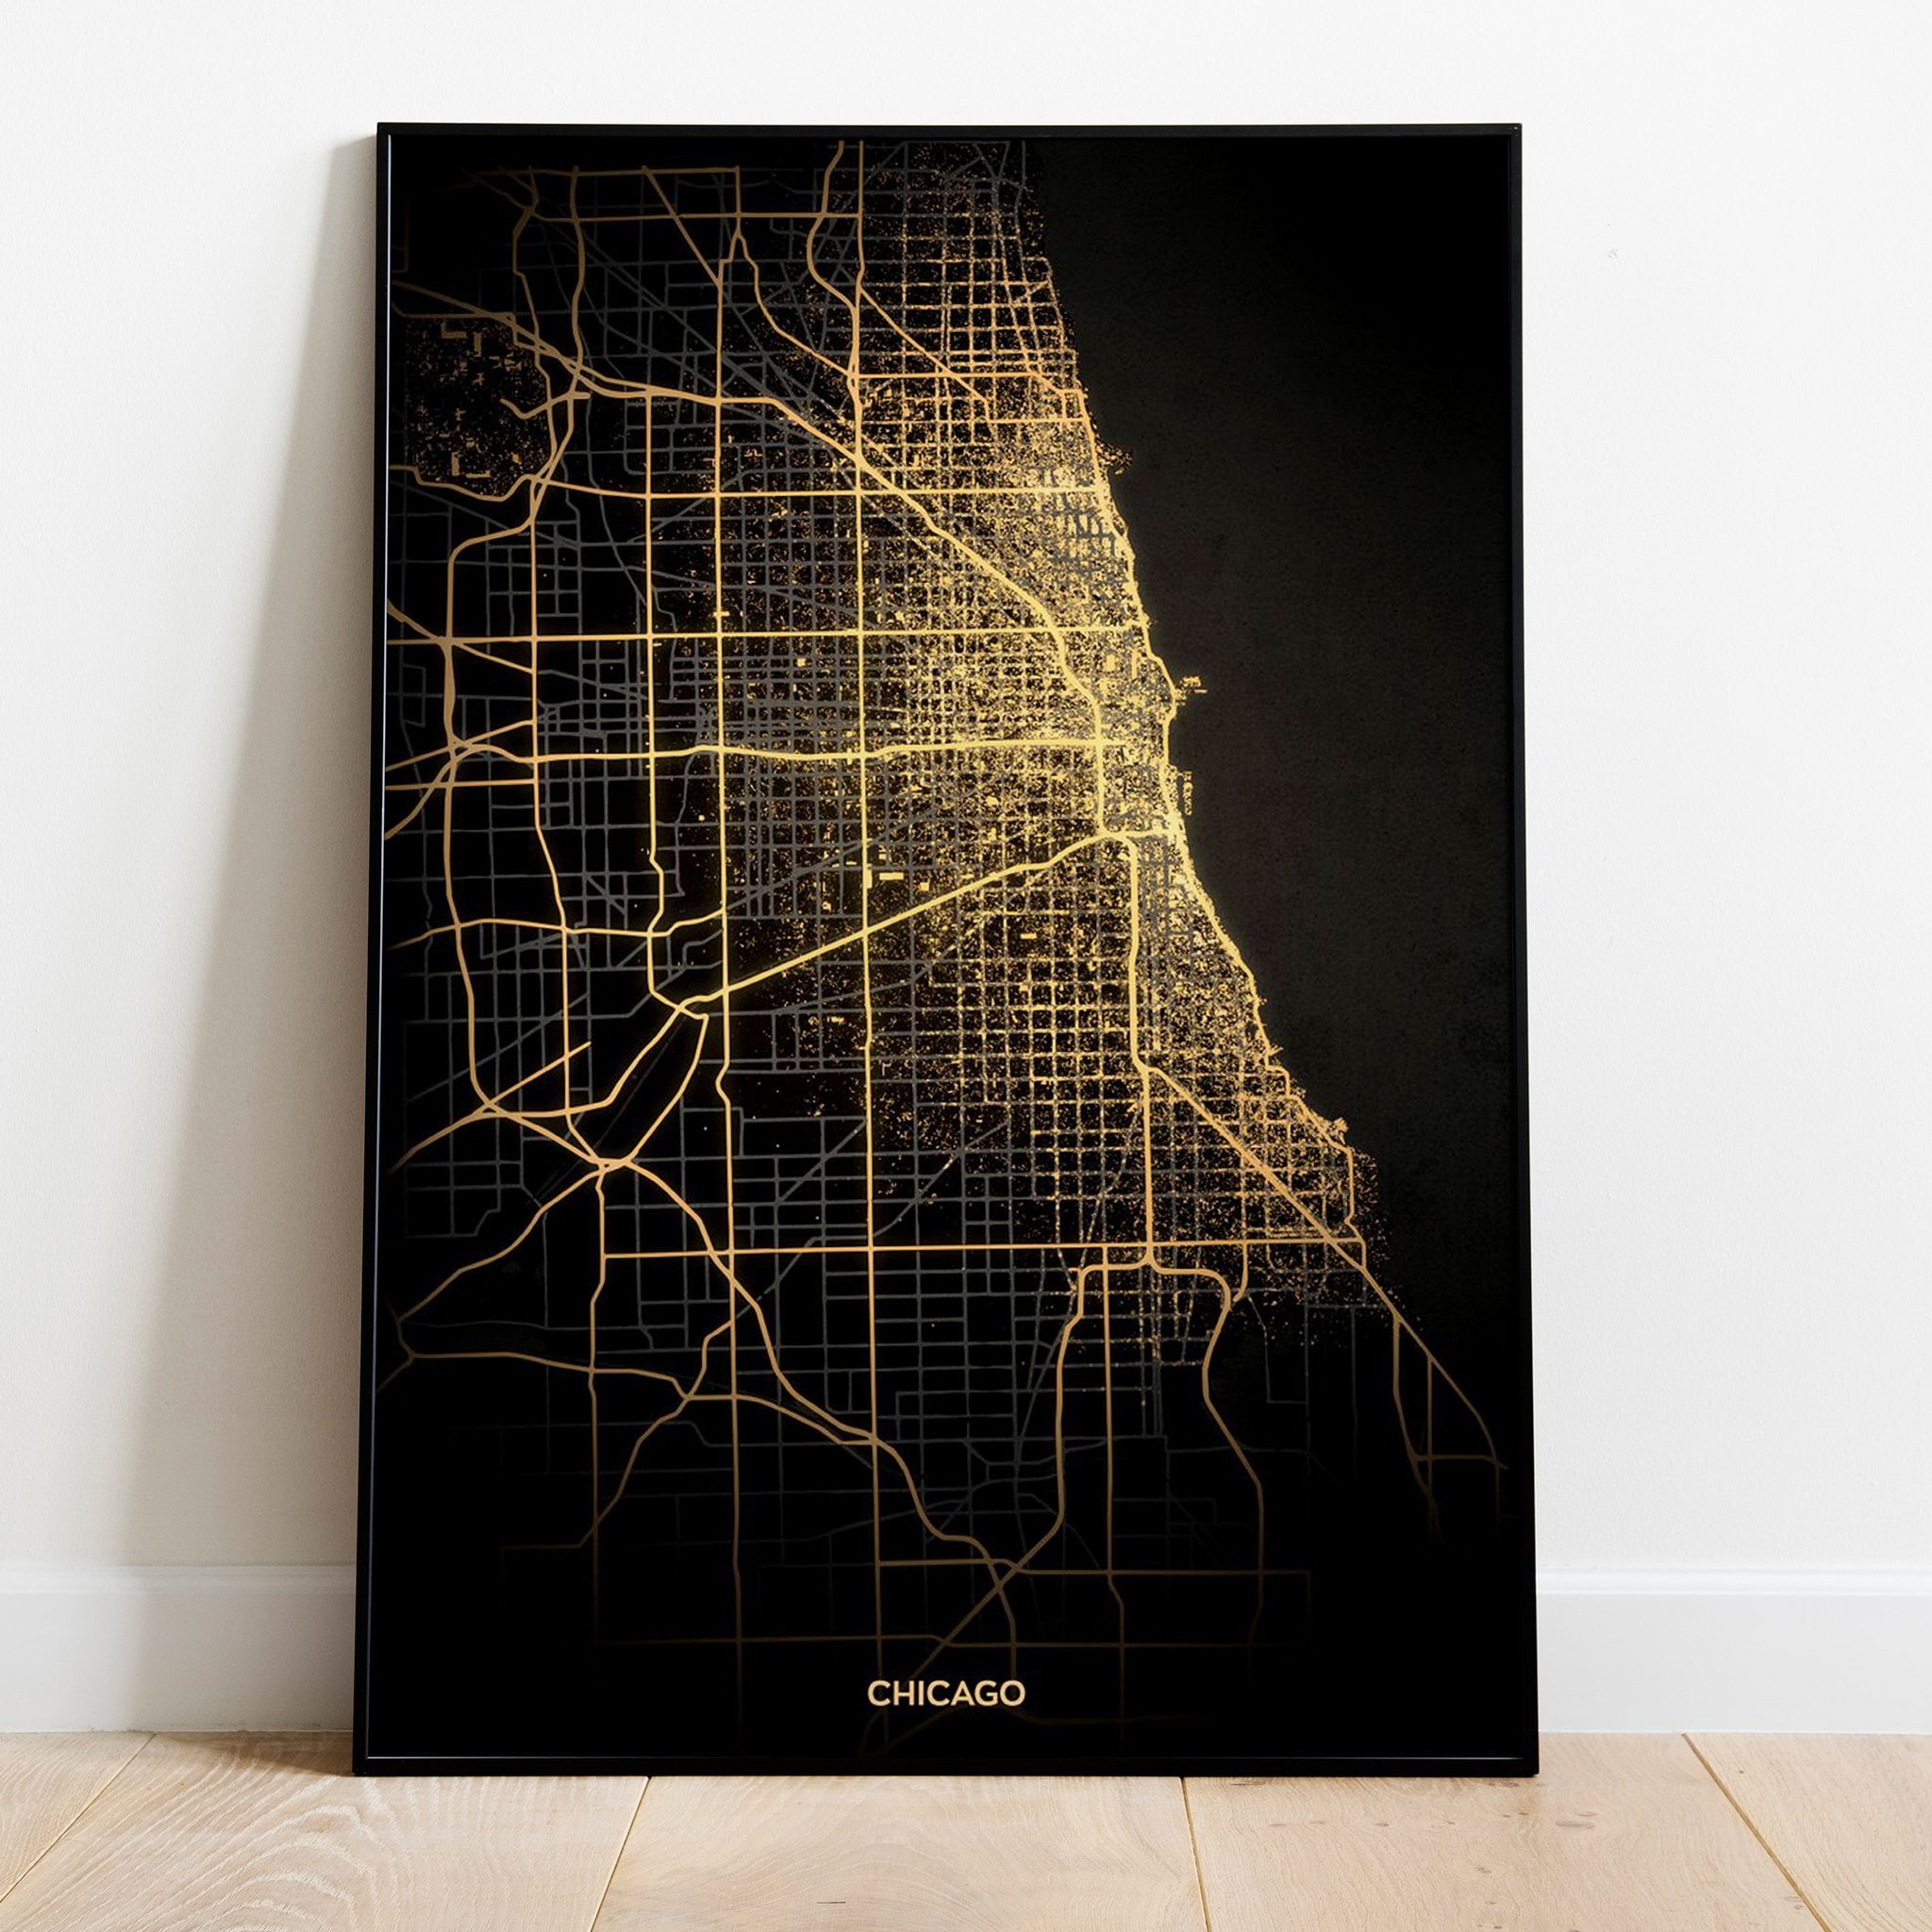 CHICAGO  P.D TV SERIES  POSTER  GLOSSY PAPER  A1 A2 A3 A4 FREE POSTAGE